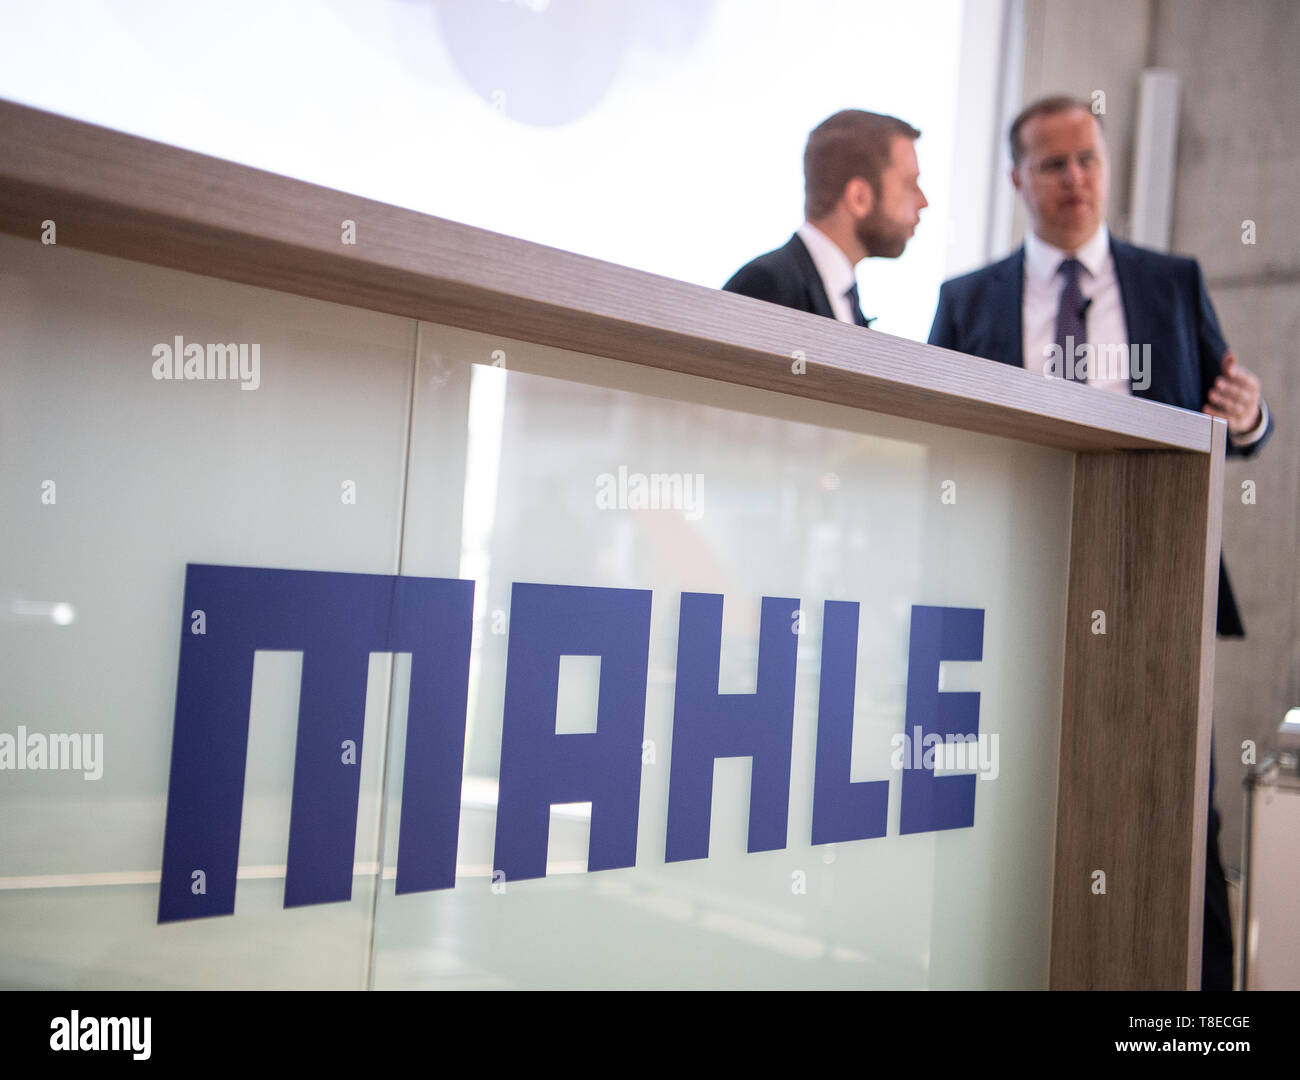 Stuttgart, Germany. 13th May, 2019. The logo of automotive supplier Mahle will be on the speaker's podium at the annual press conference. Credit: Fabian Sommer/dpa/Alamy Live News Stock Photo